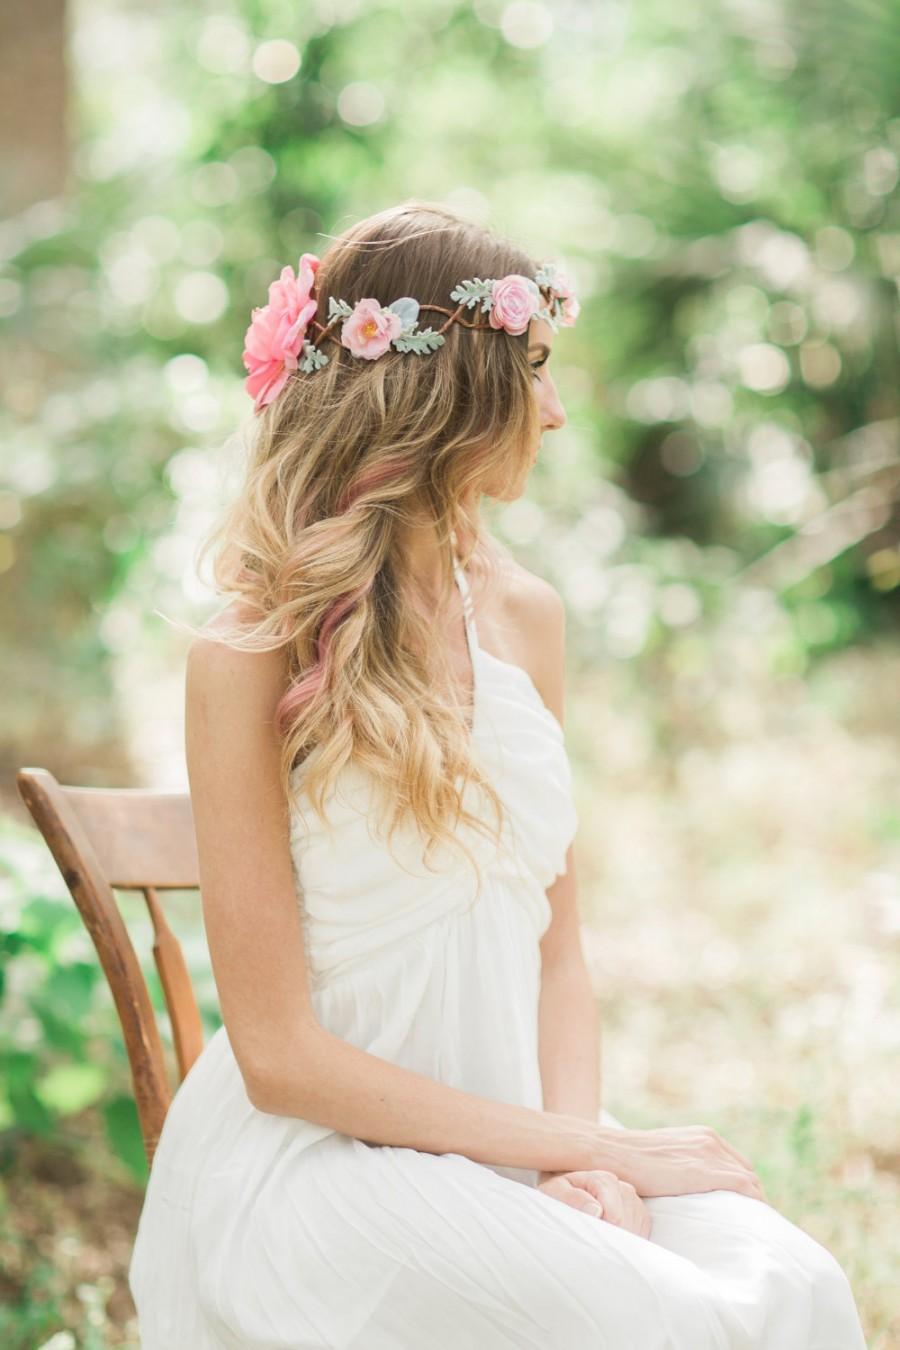 Mariage - The Nicala Flower Crown with wild roses, ranunculus, and dusty miller